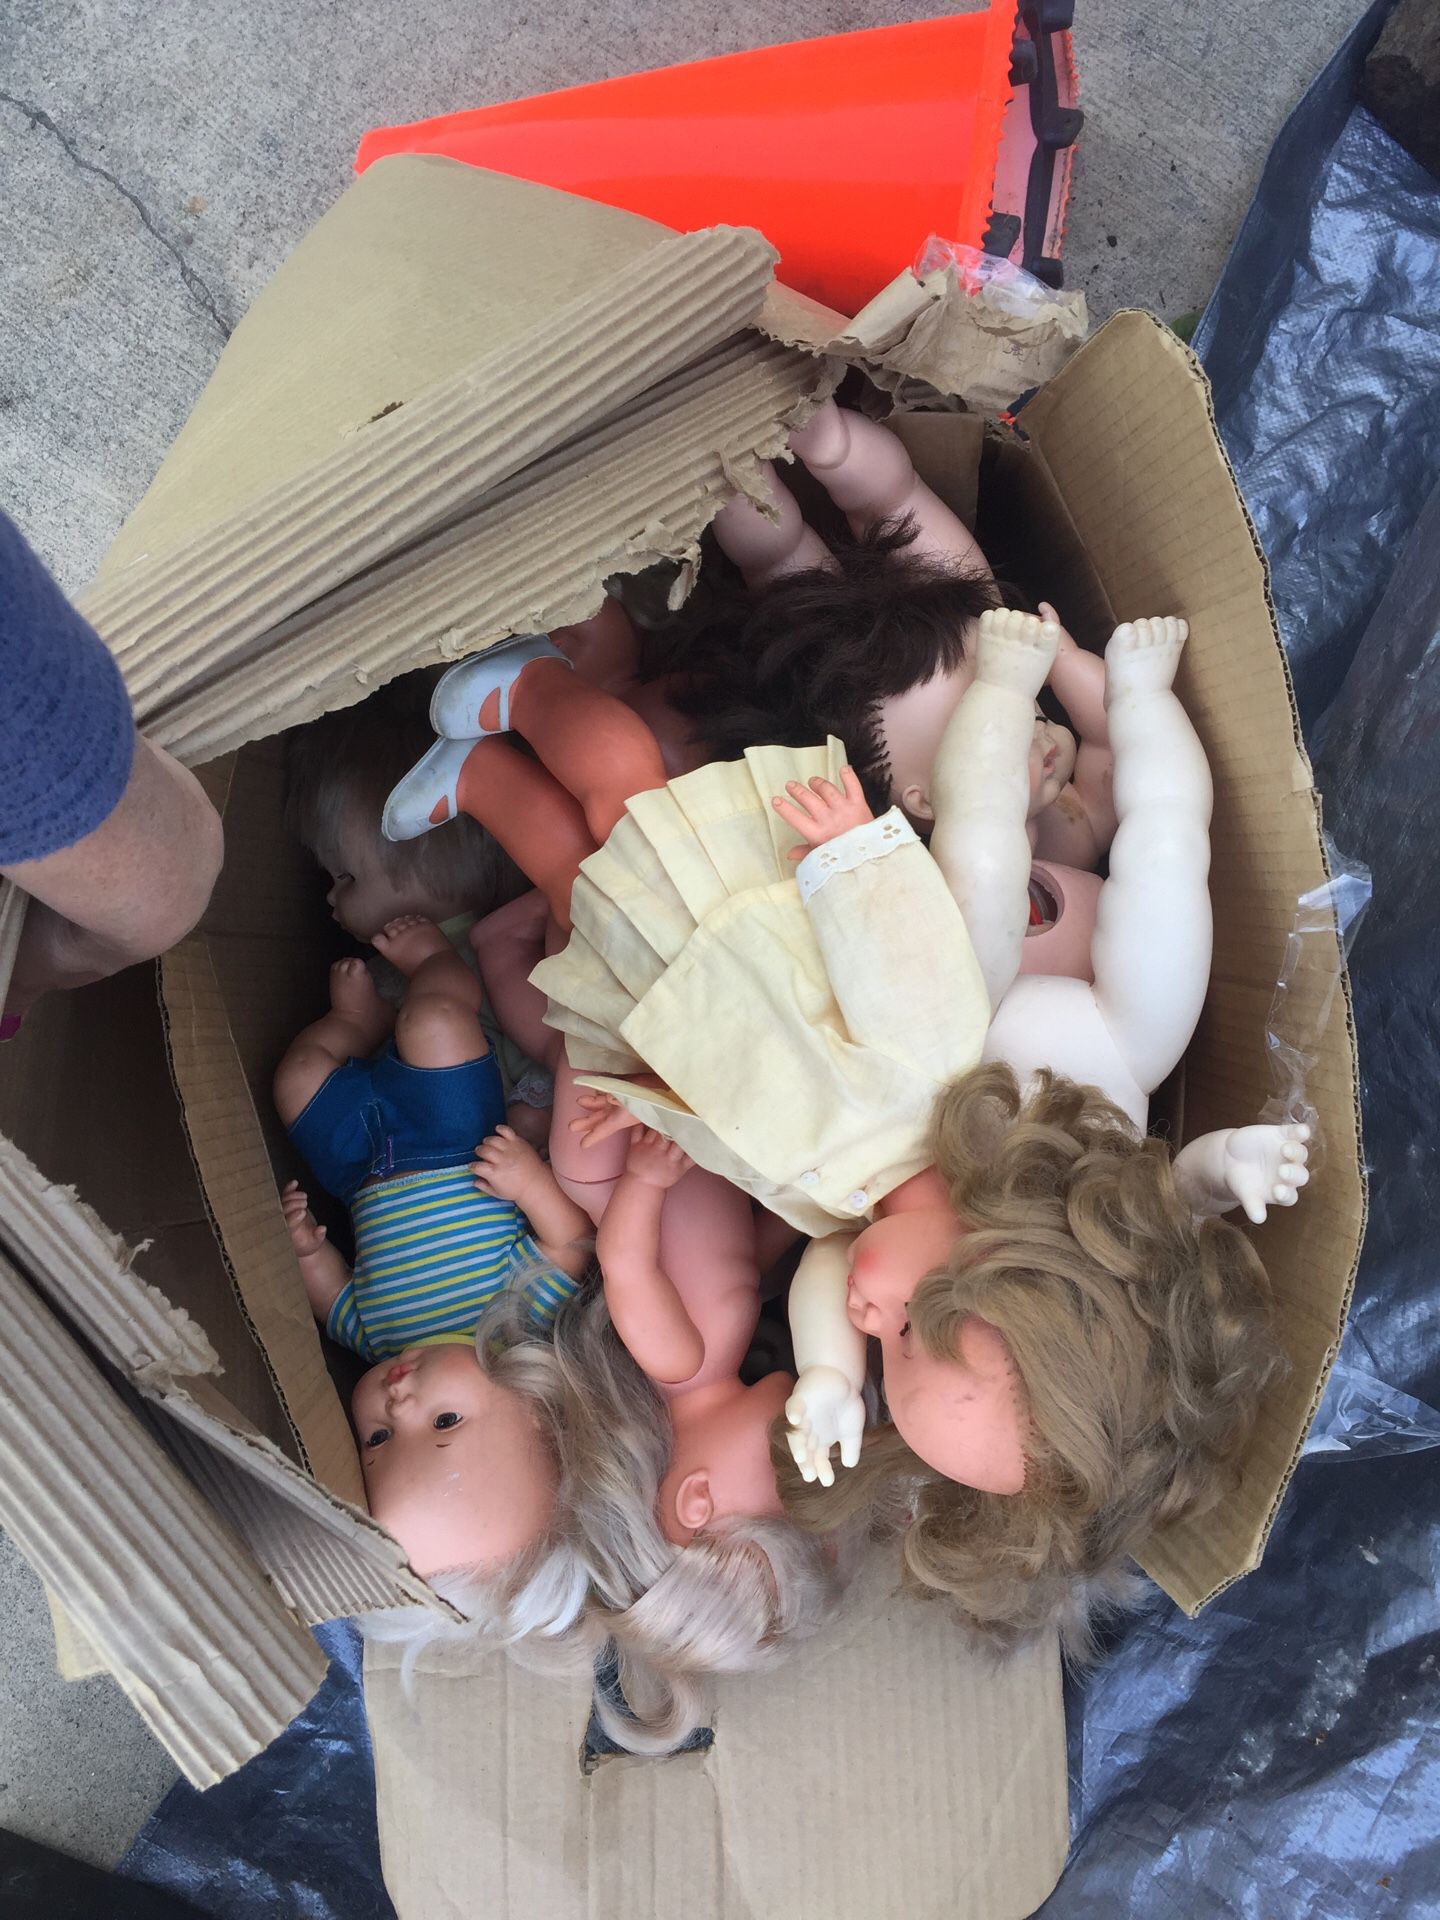 Big box full of antique and vintage, mostly broken baby dolls